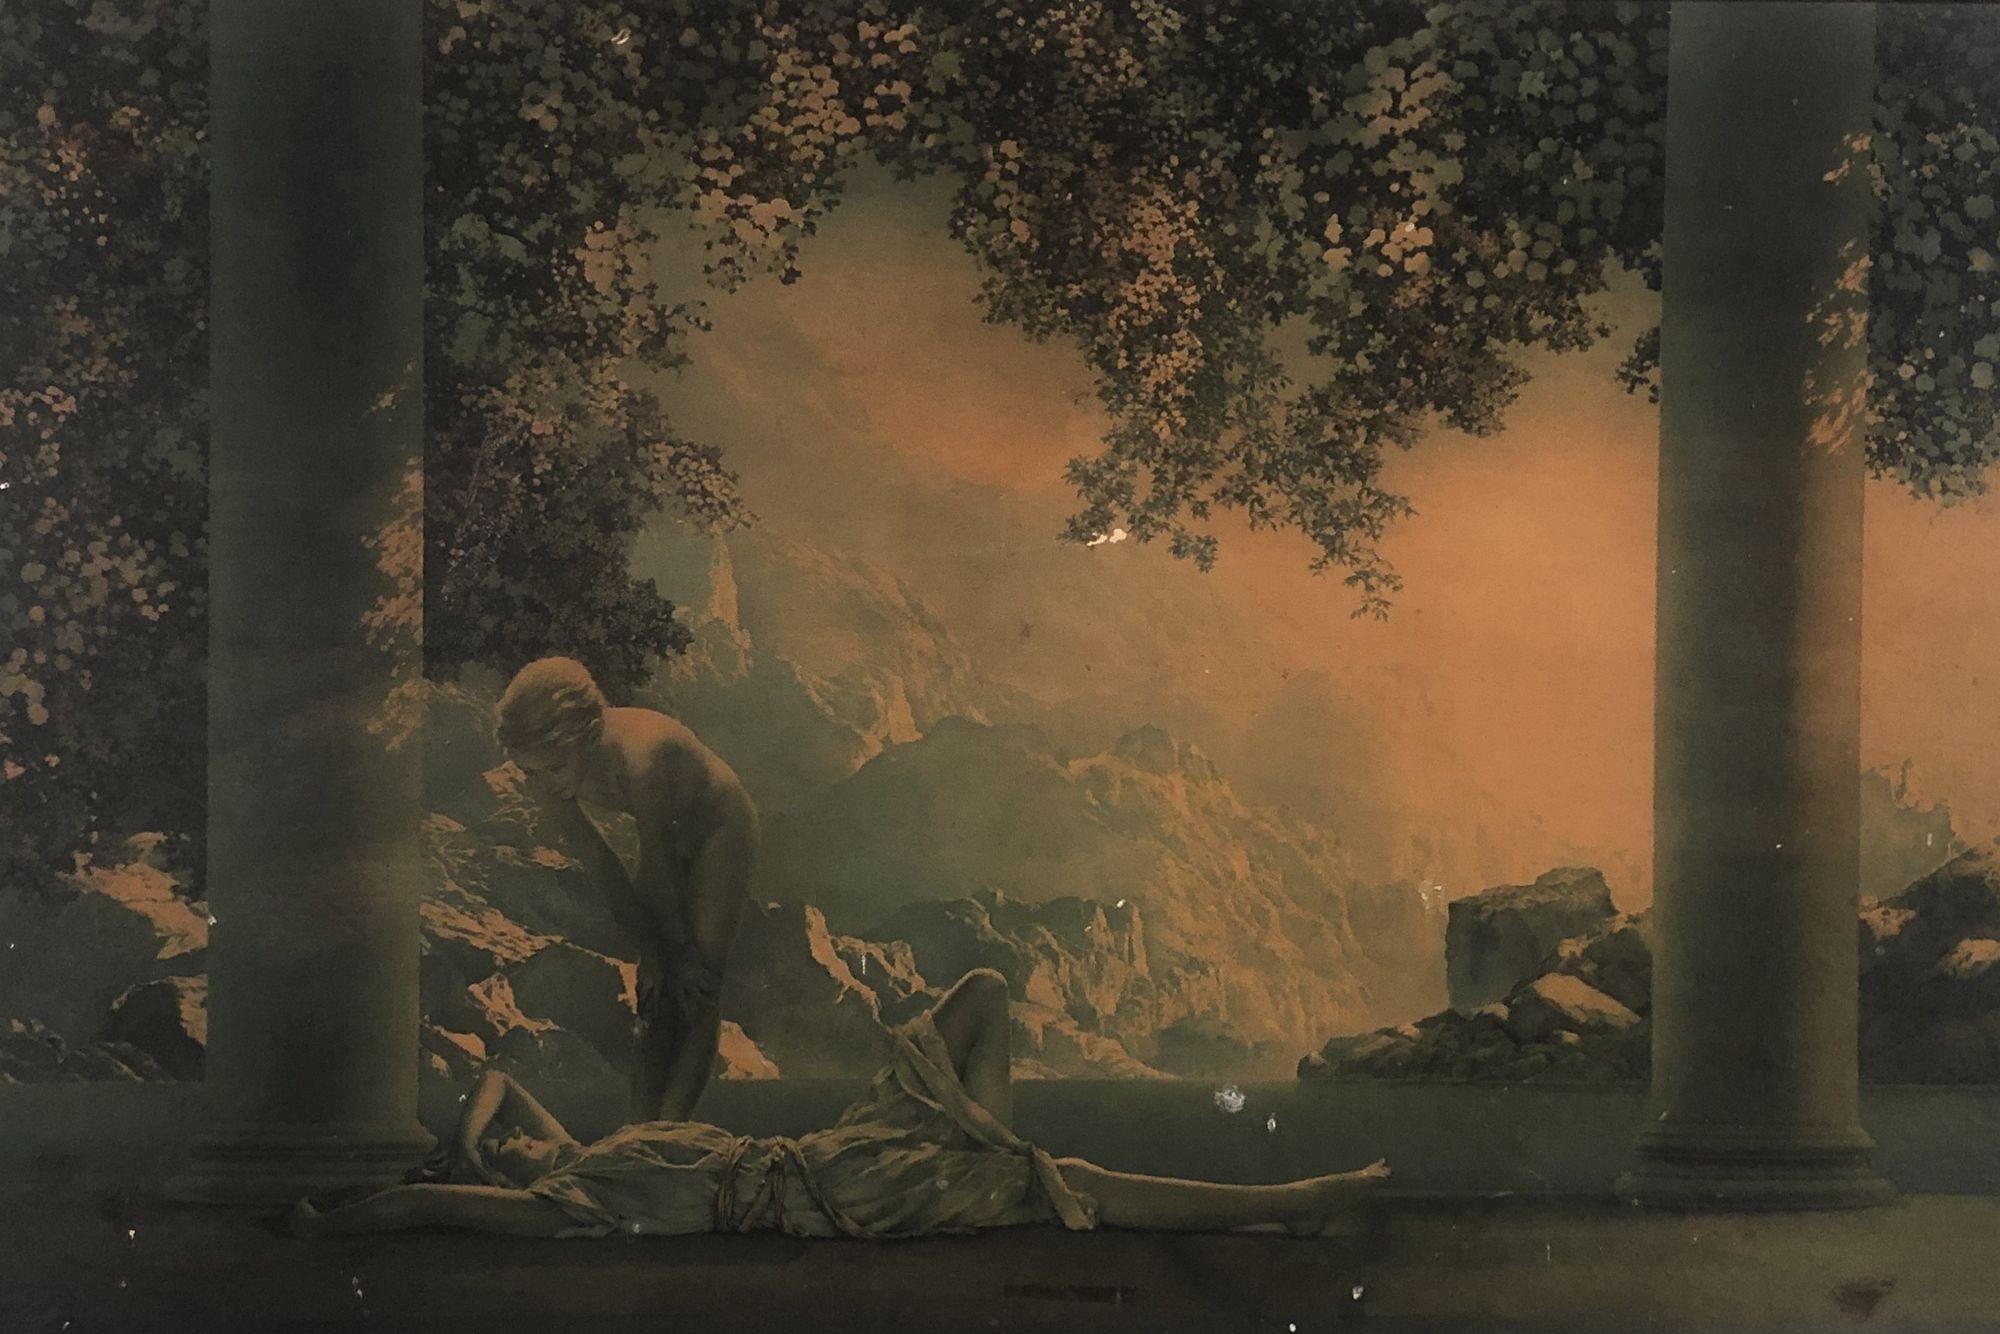 Lithograph by Maxfield Parrish titled 'Daybreak'. In its original frame. There is some glare and reflections in the photos due to the glass.

Circa 1920. Daybreak is a painting by American artist Maxfield Parrish made in 1922. Daybreak, inspired